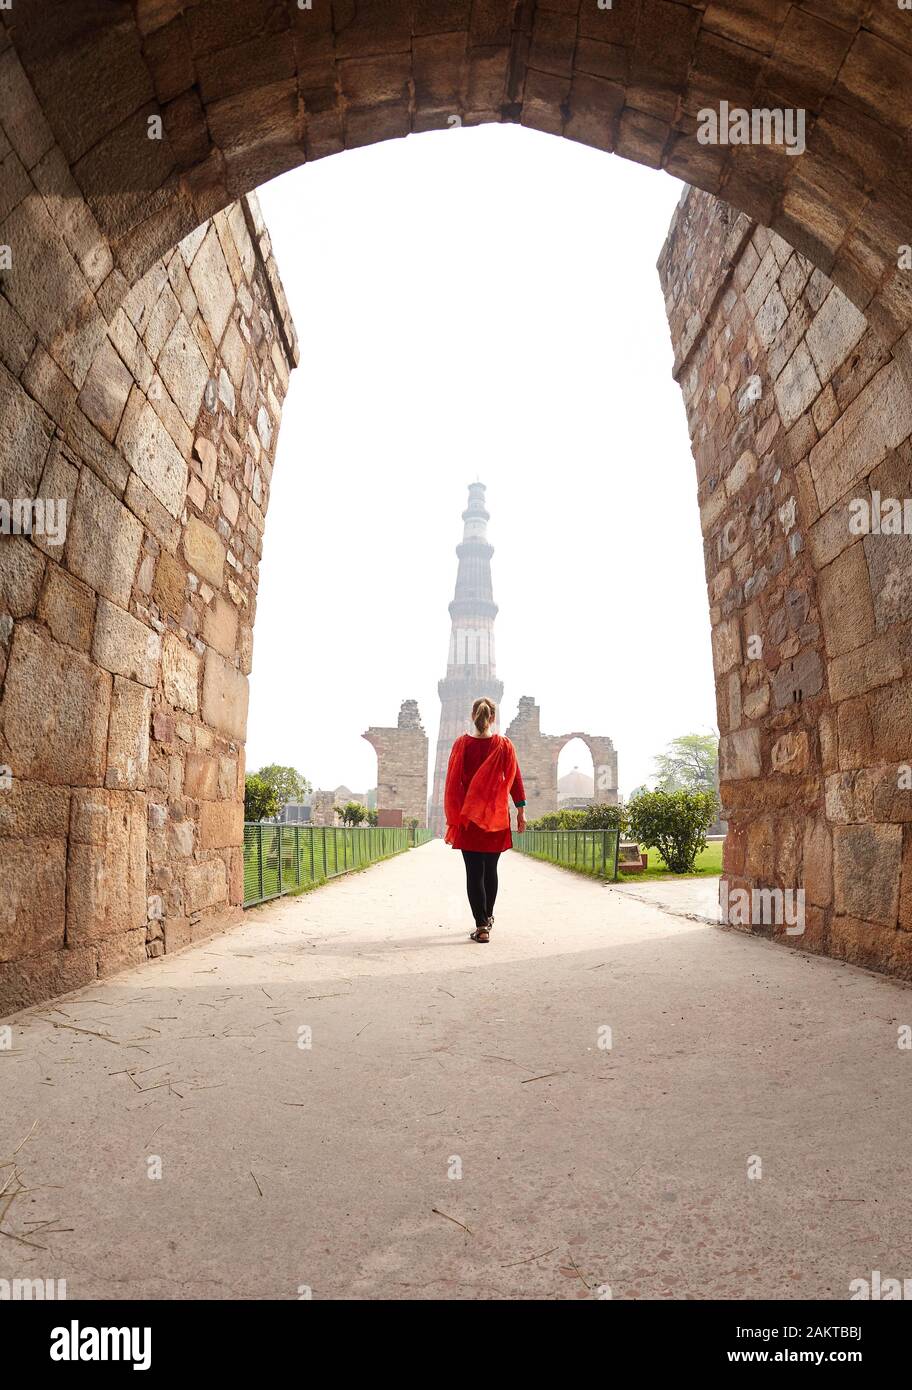 Woman in red costume walking to Qutub Minar tower in Delhi, India Stock Photo